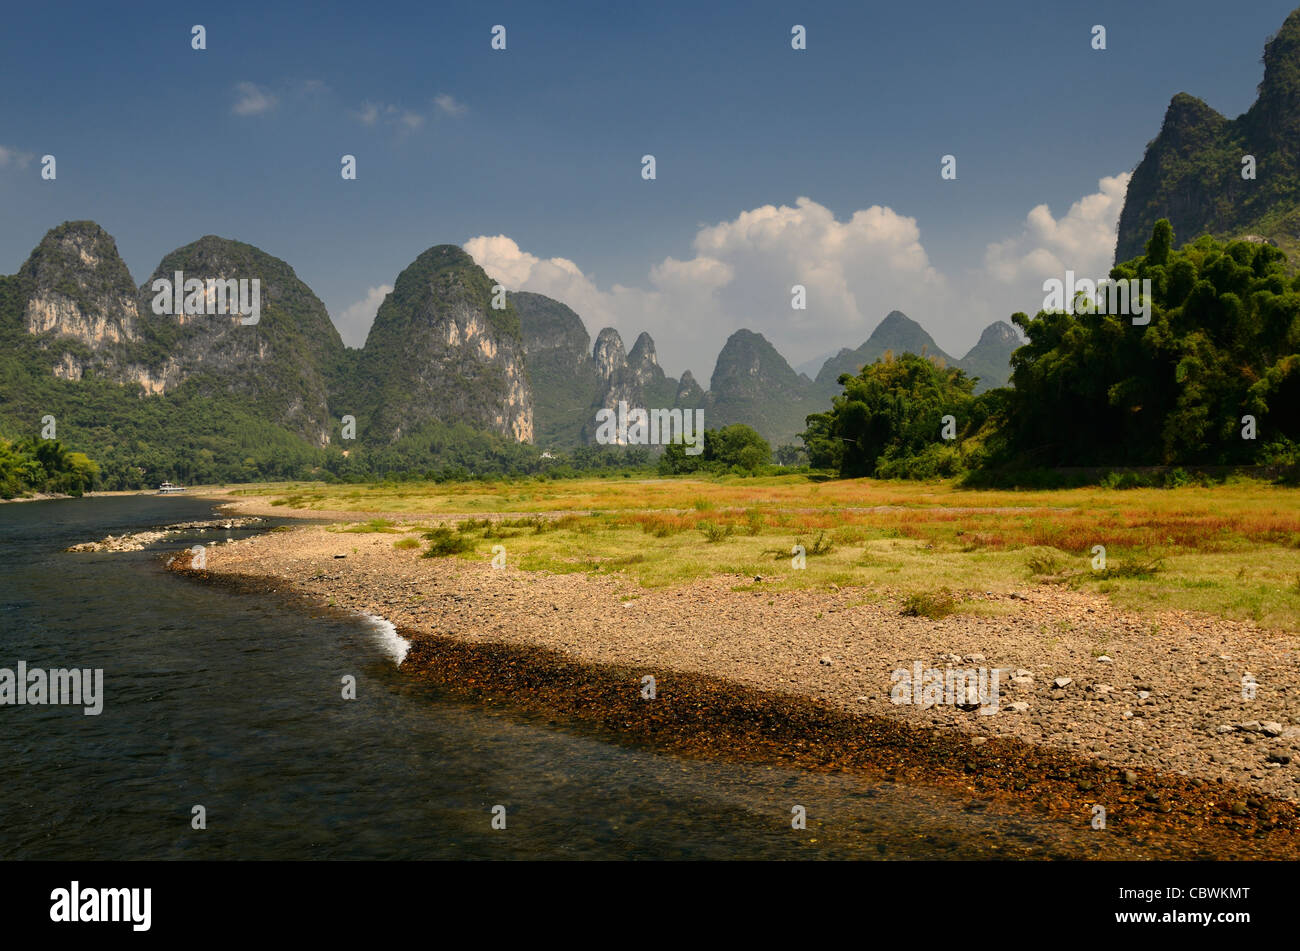 Pebble shore of the Li or Lijiang River Peoples Republic of China with pointed Karst cones and peaks Stock Photo